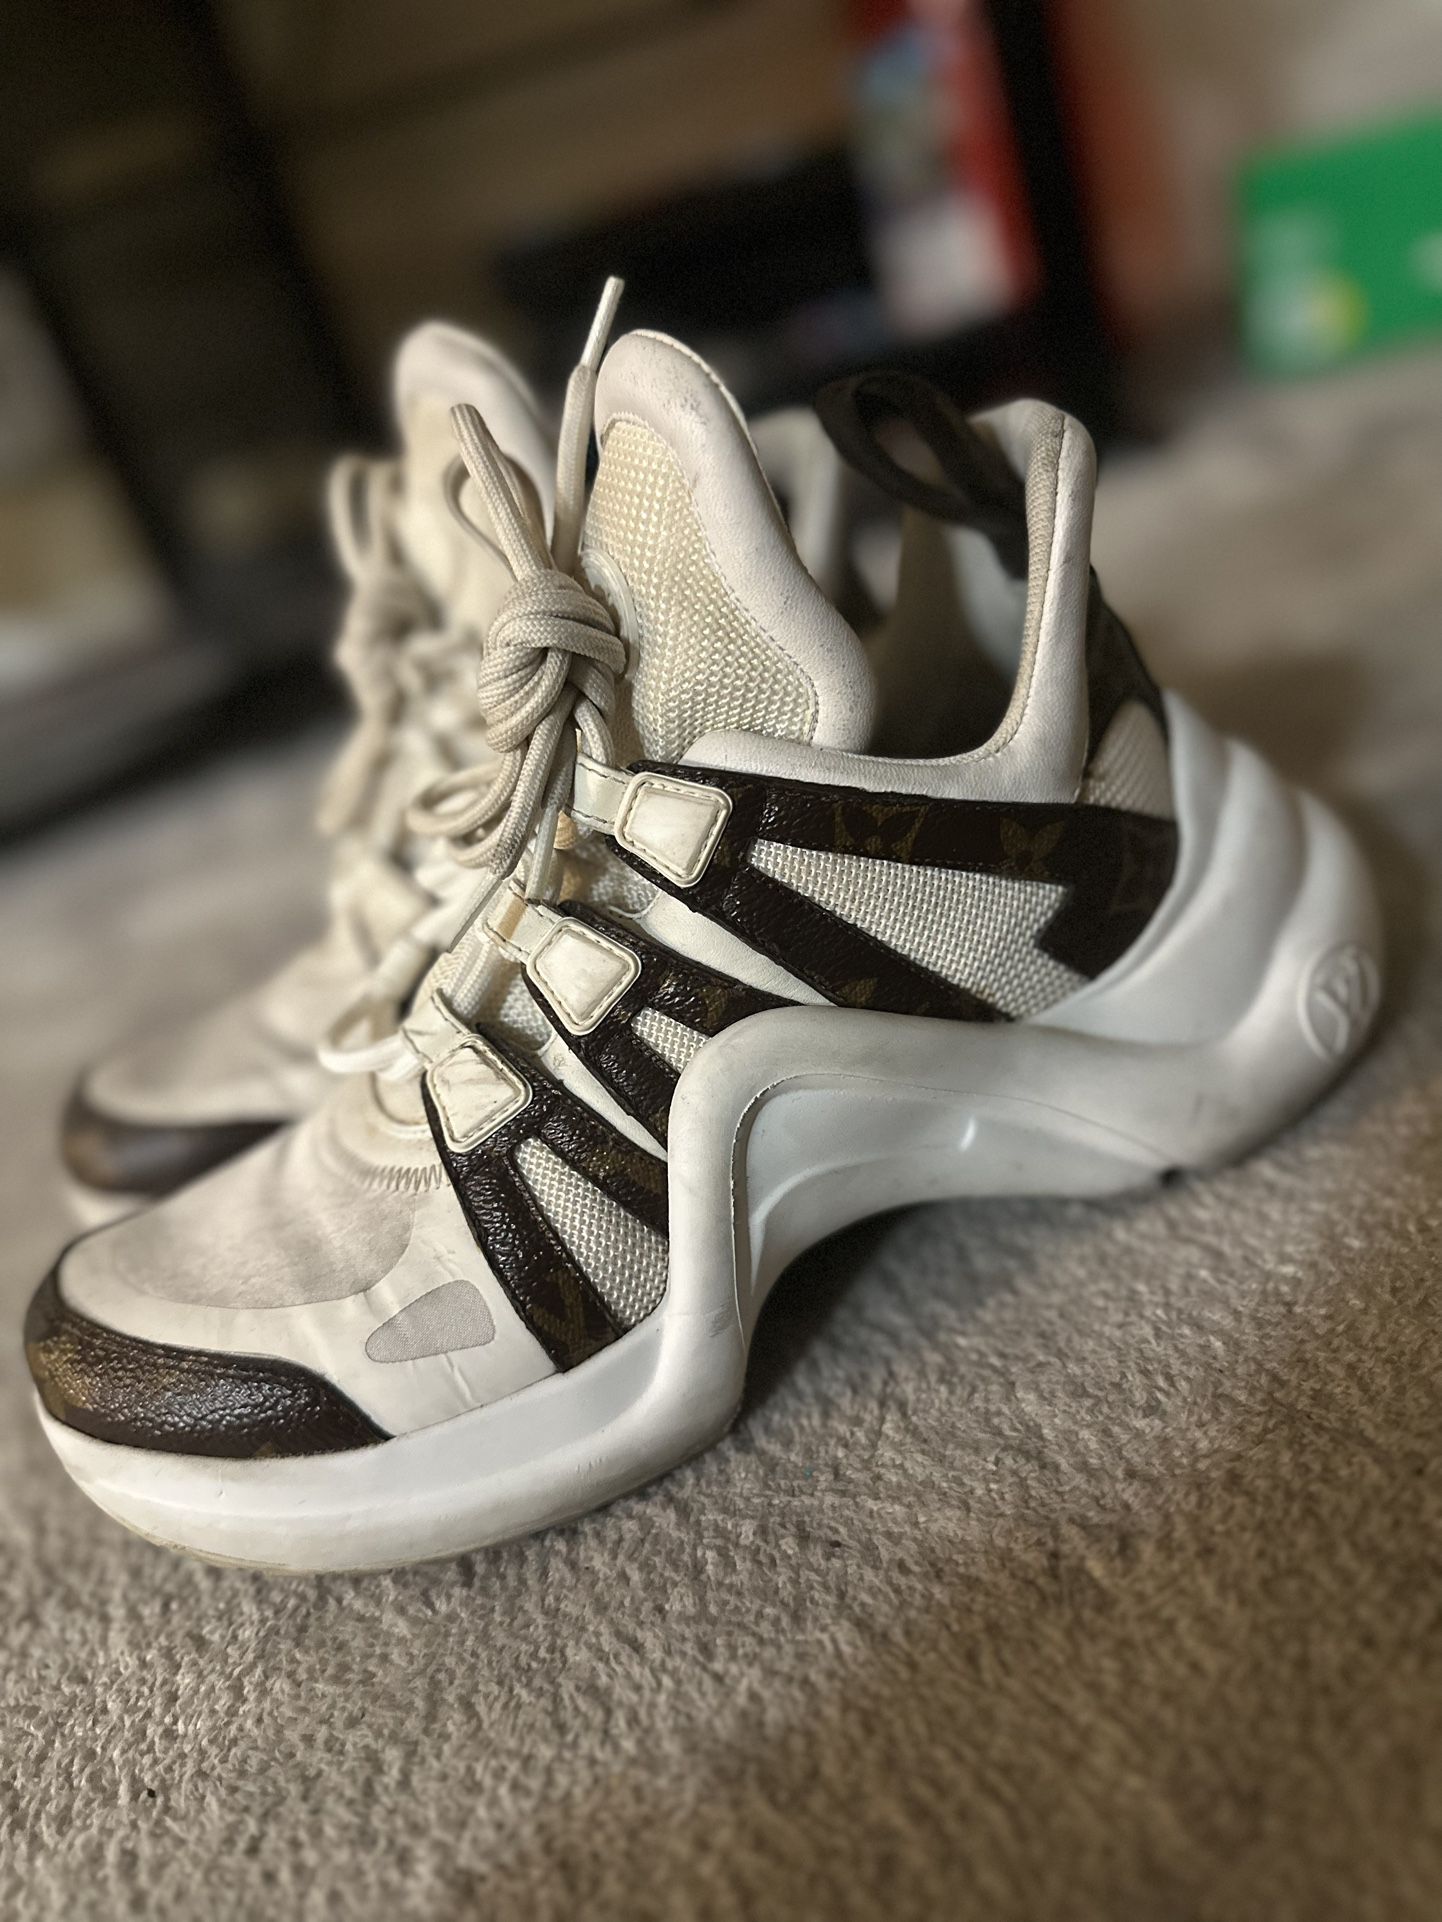 Louis Vuitton LV Archlight Sneakers Second Hand / Selling